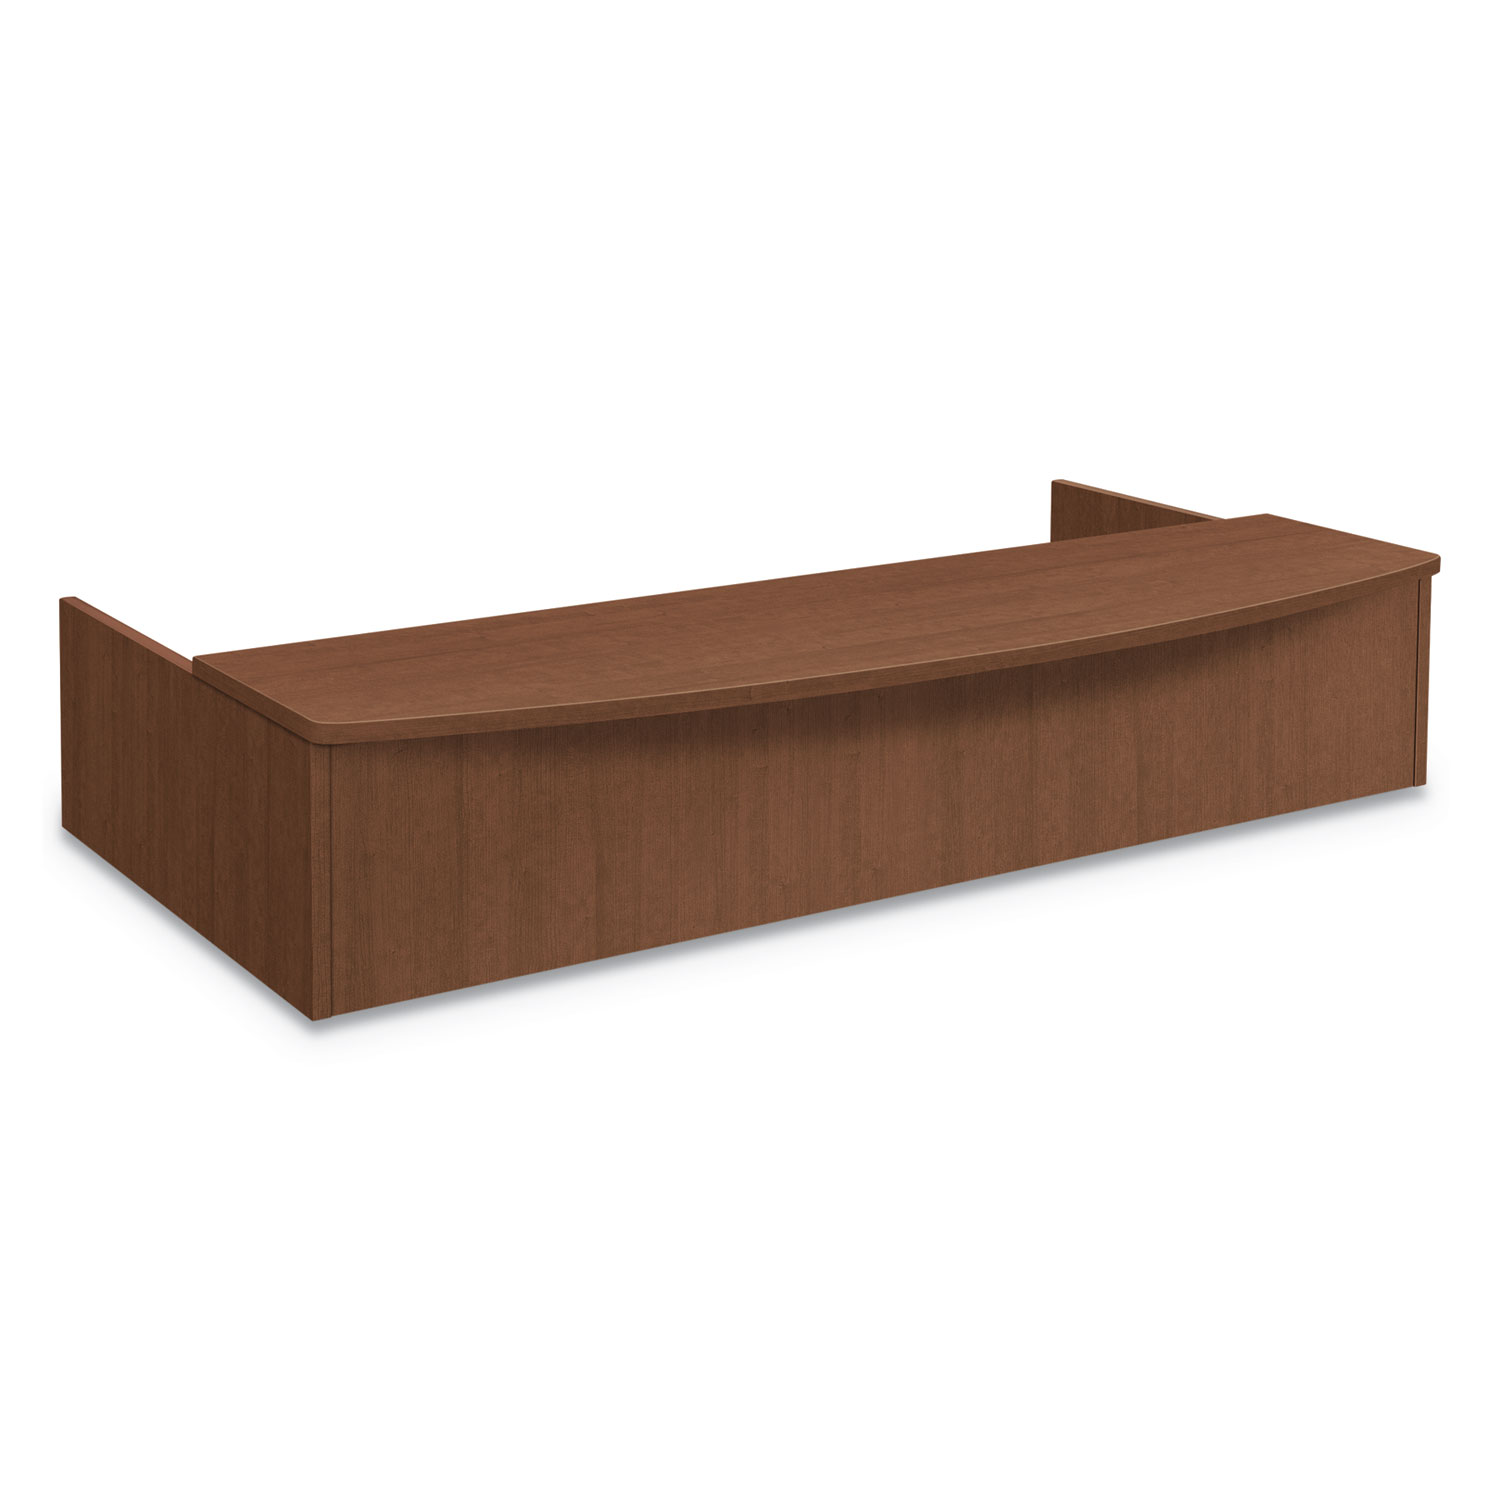 Foundation Reception Station with Bow Front, 72w x 36d x 14 1/4h, Shaker Cherry